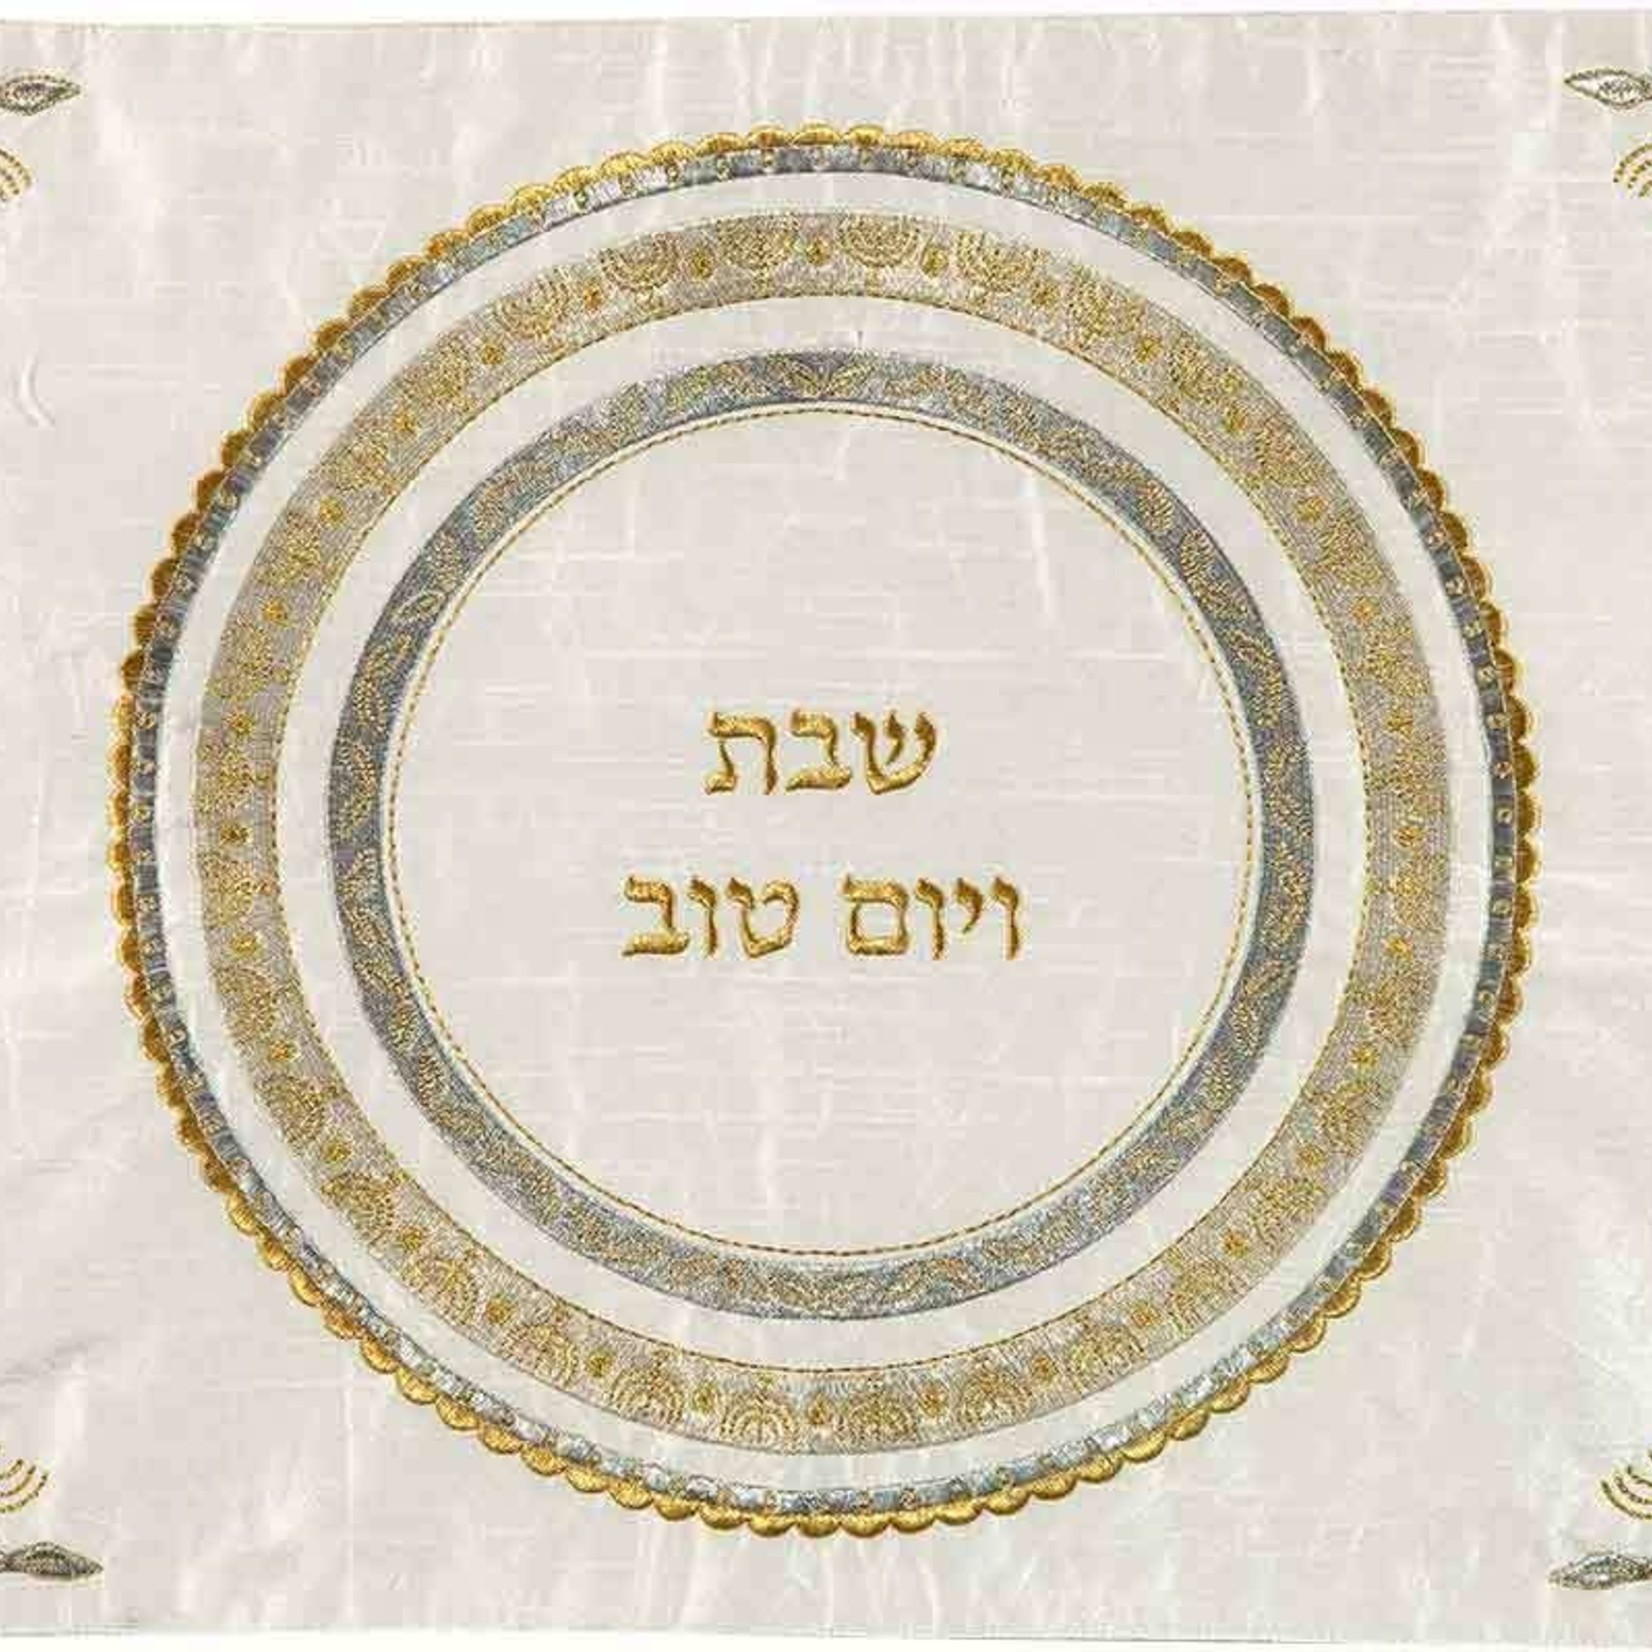 Machine Embroidered Challah Cover- Gold and Silver Menorahs